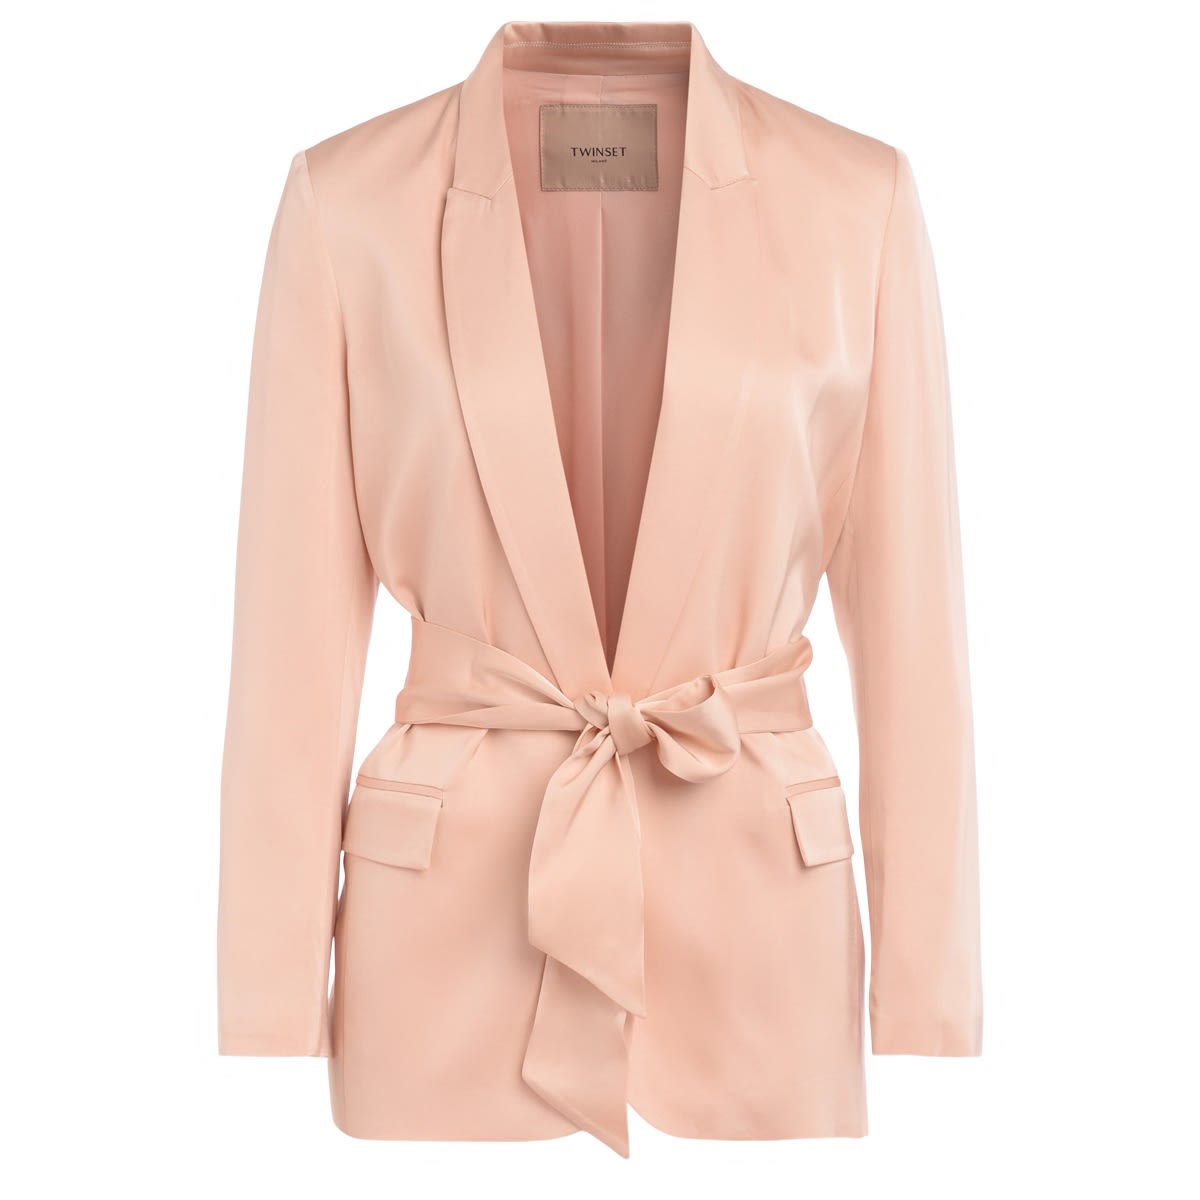 Twinset Jacket In Pink Satin